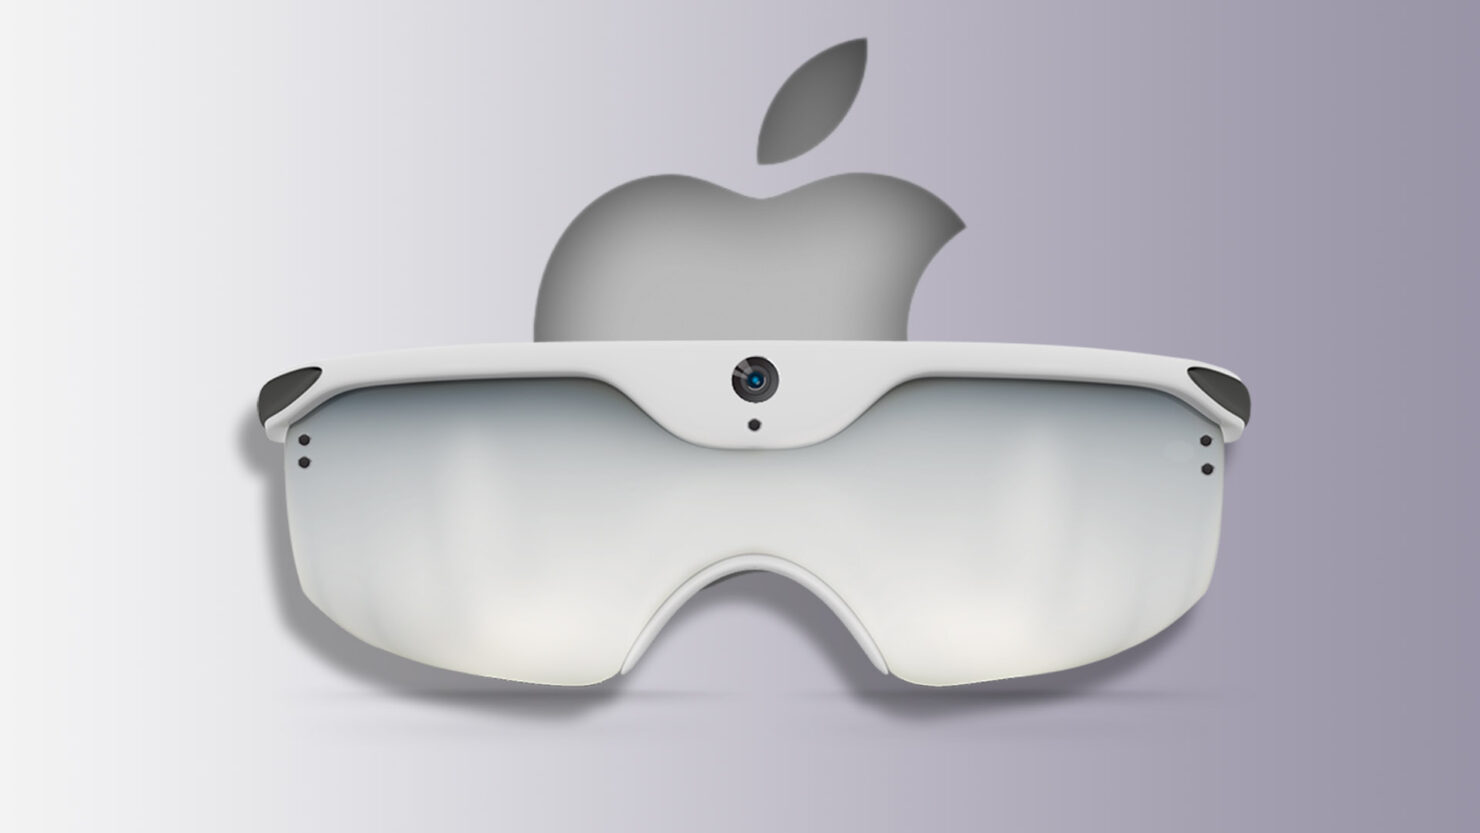 Apple CEO Tim Cook optimistic about augmented reality technology, admitting Apple has major AR/VR plans